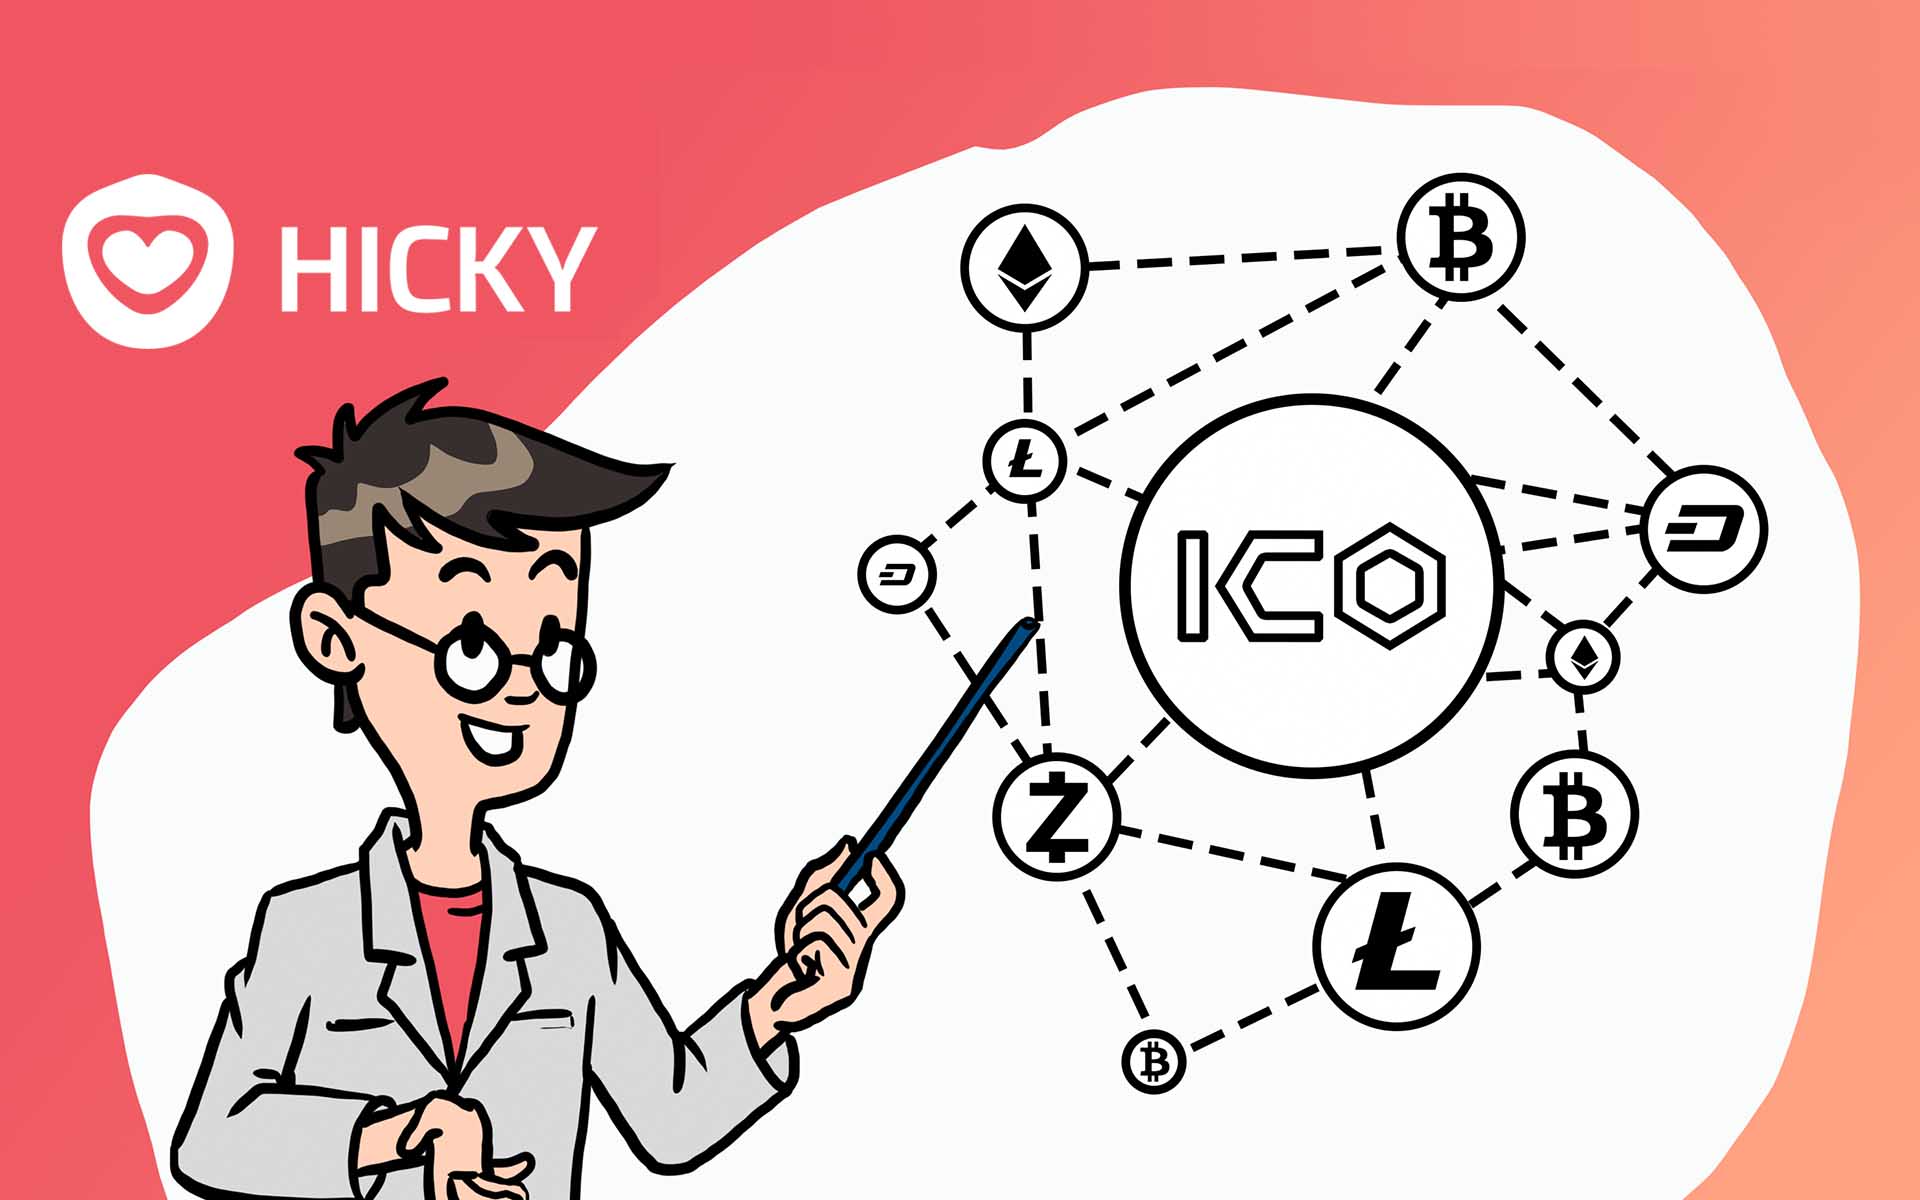 Blockchain Dating App Hicky Launches ICO on Valentine's Day